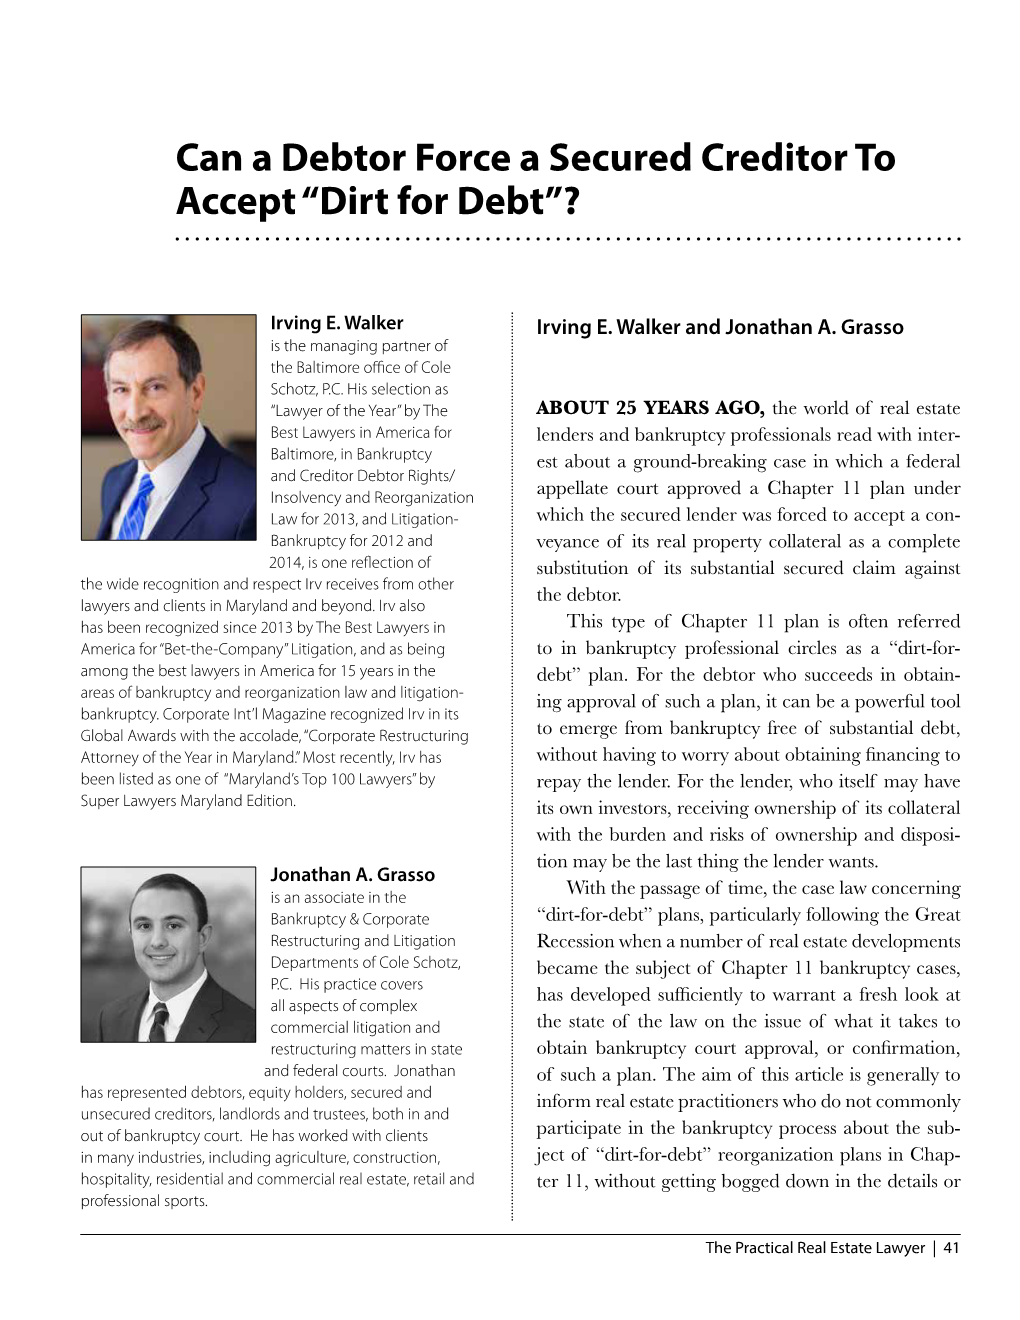 Can a Debtor Force a Secured Creditor to Accept “Dirt for Debt”?